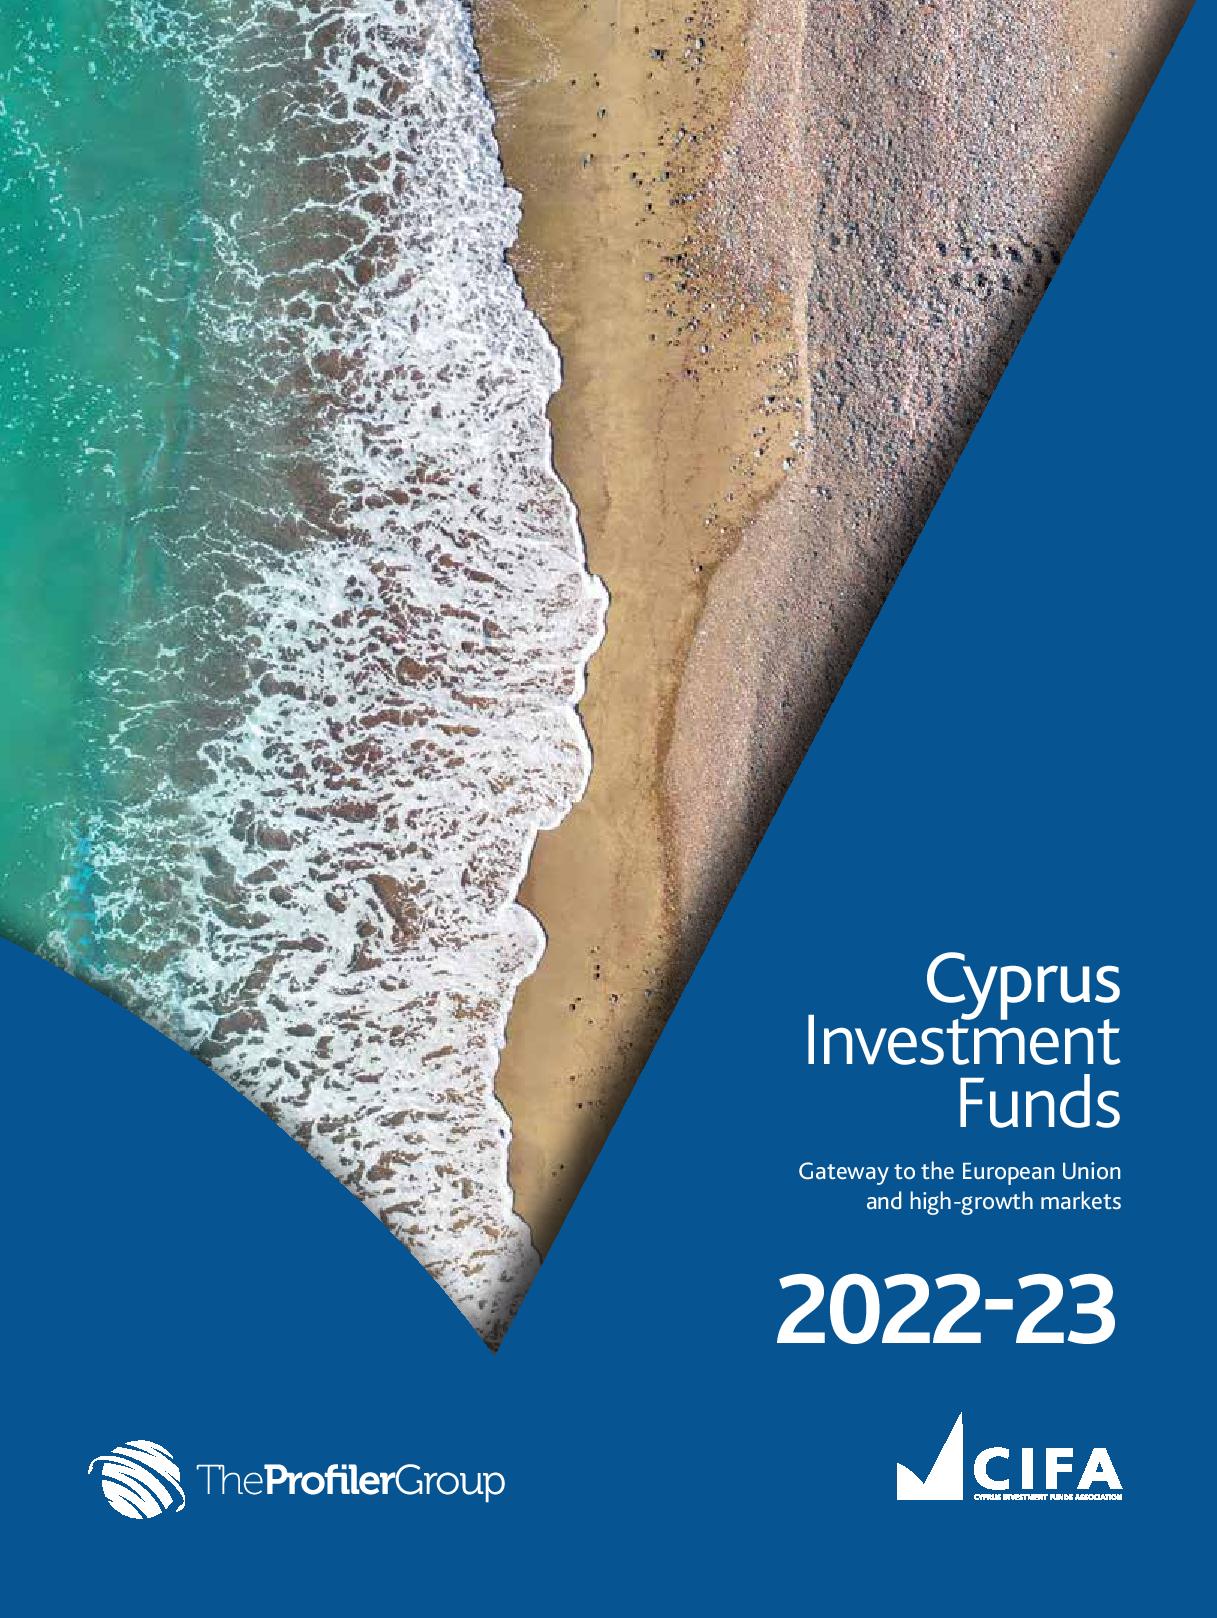 CIFA Investment Funds Guide 2022-2023